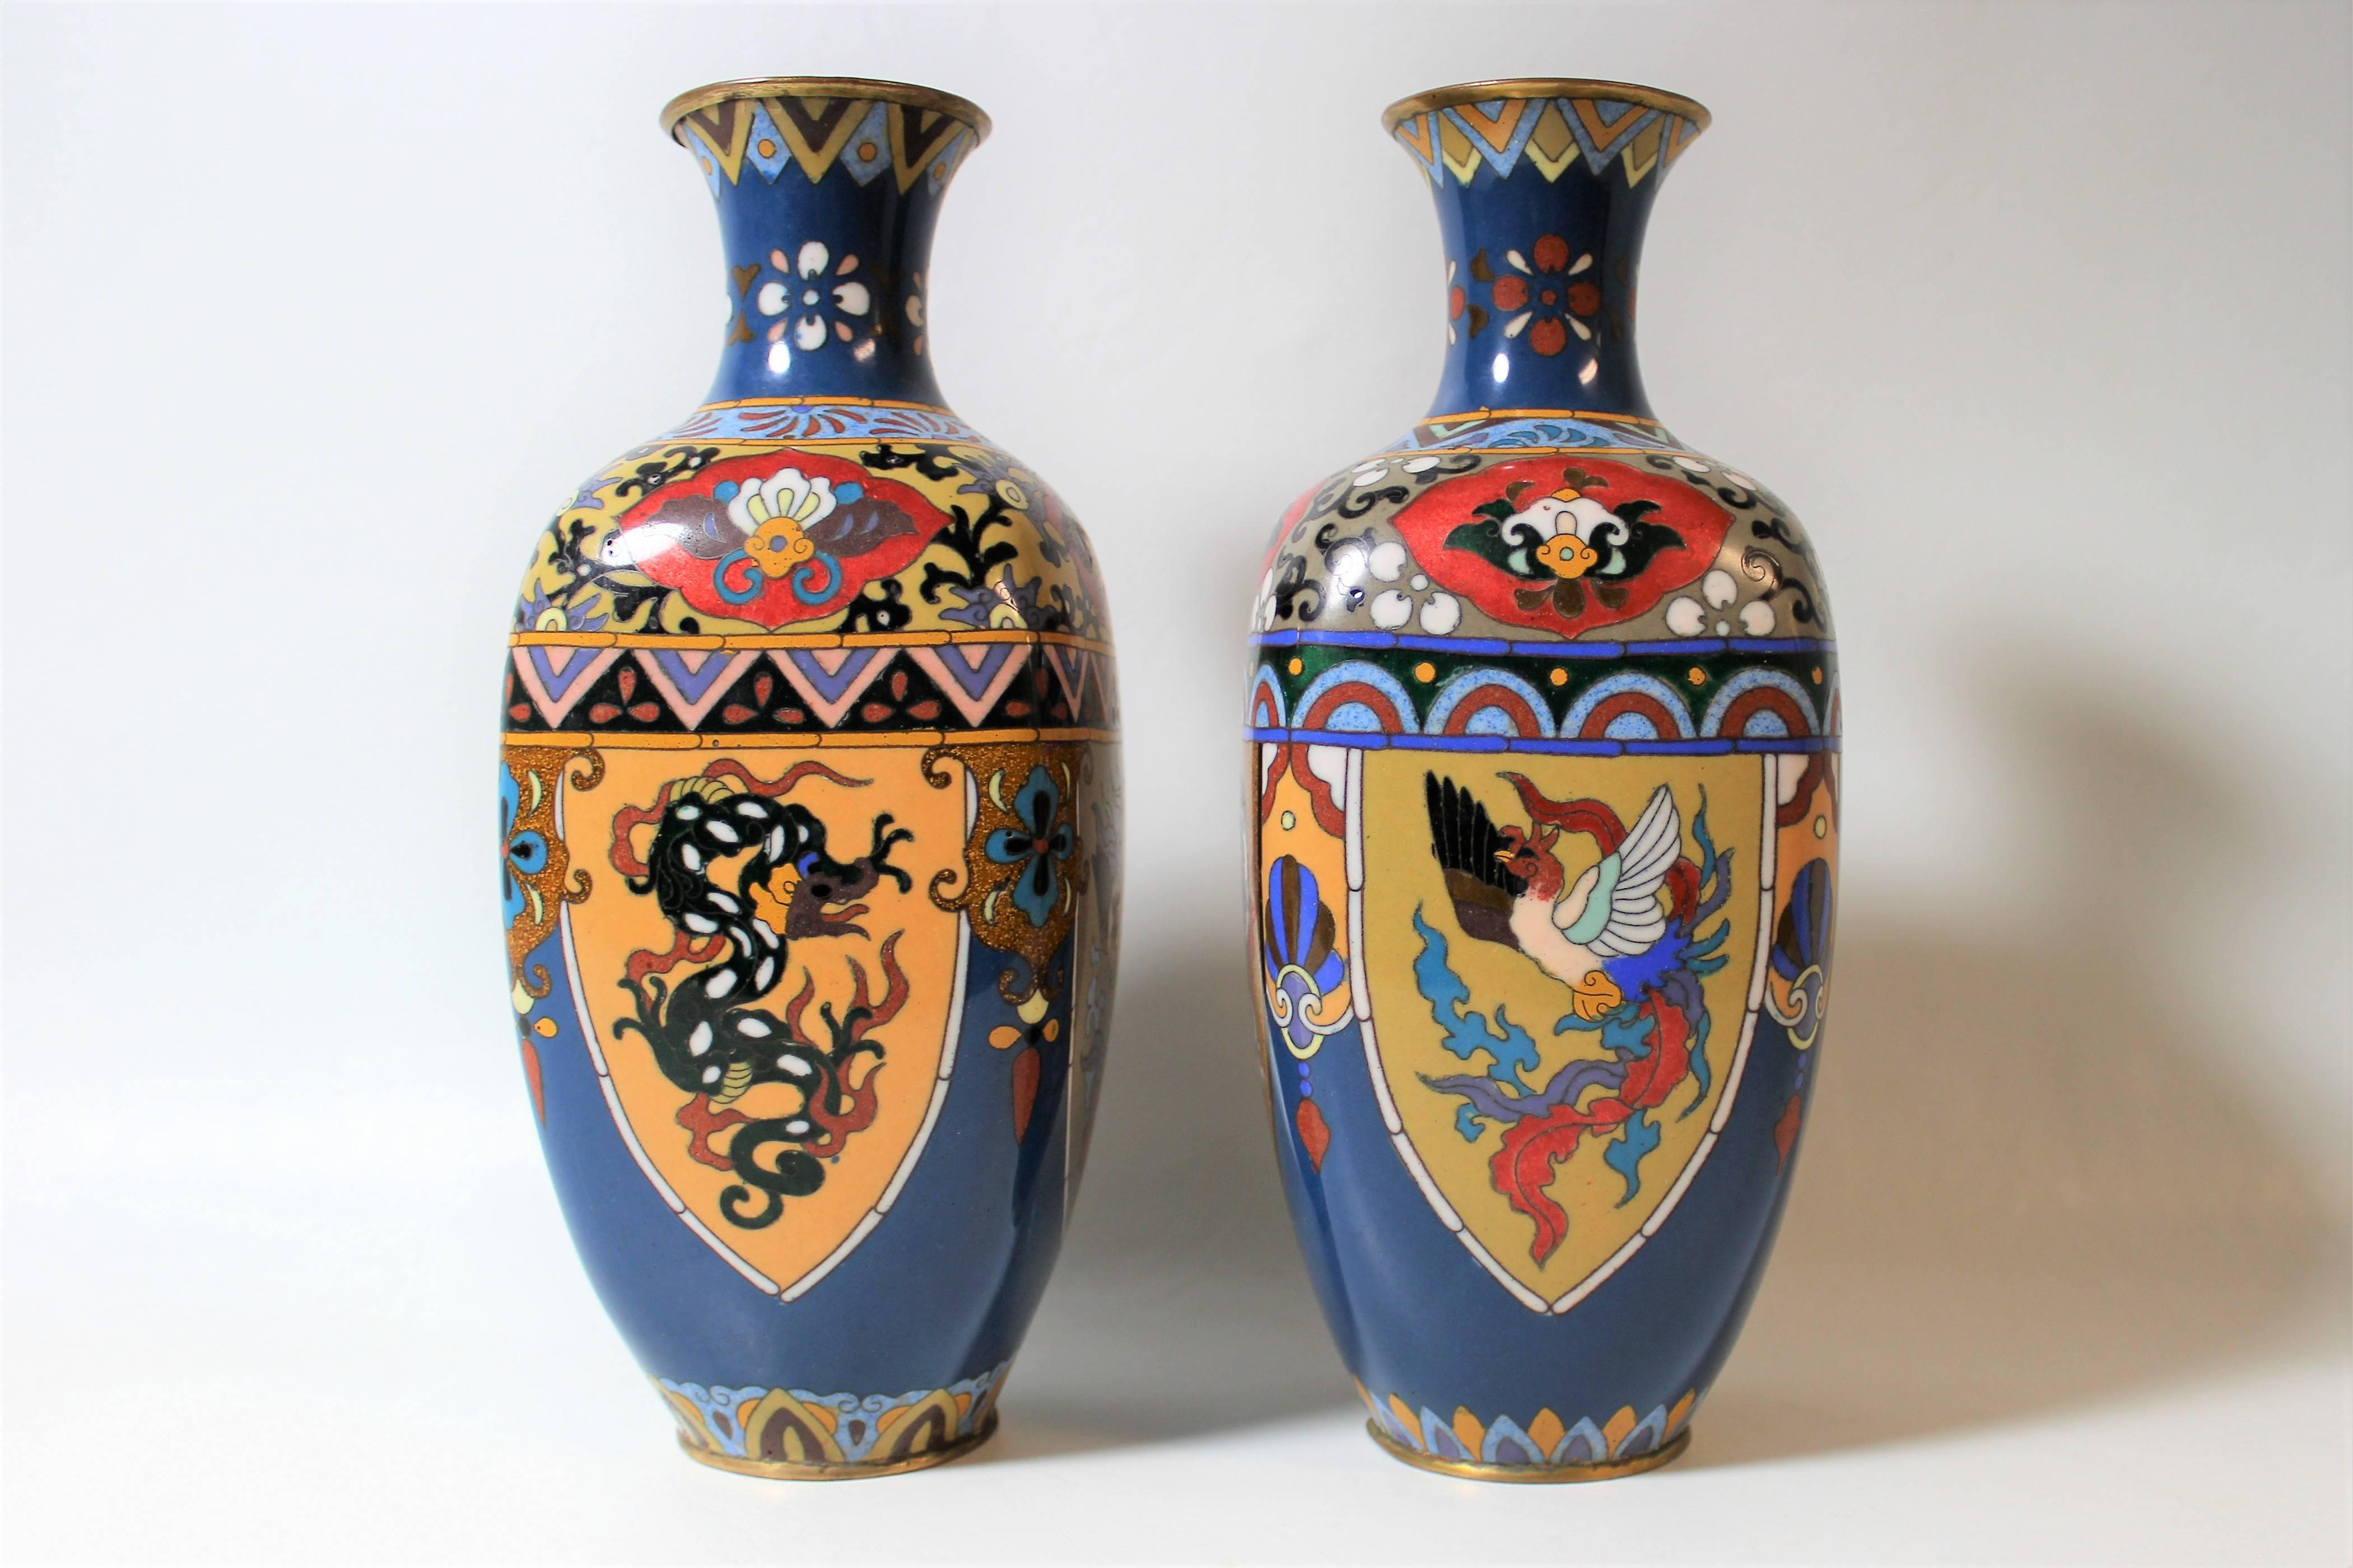 Pair of Japanese cloisonne vases dating to the late Meiji period. Each vase is decorated with matching designs of dragons and phoenixes around the body.